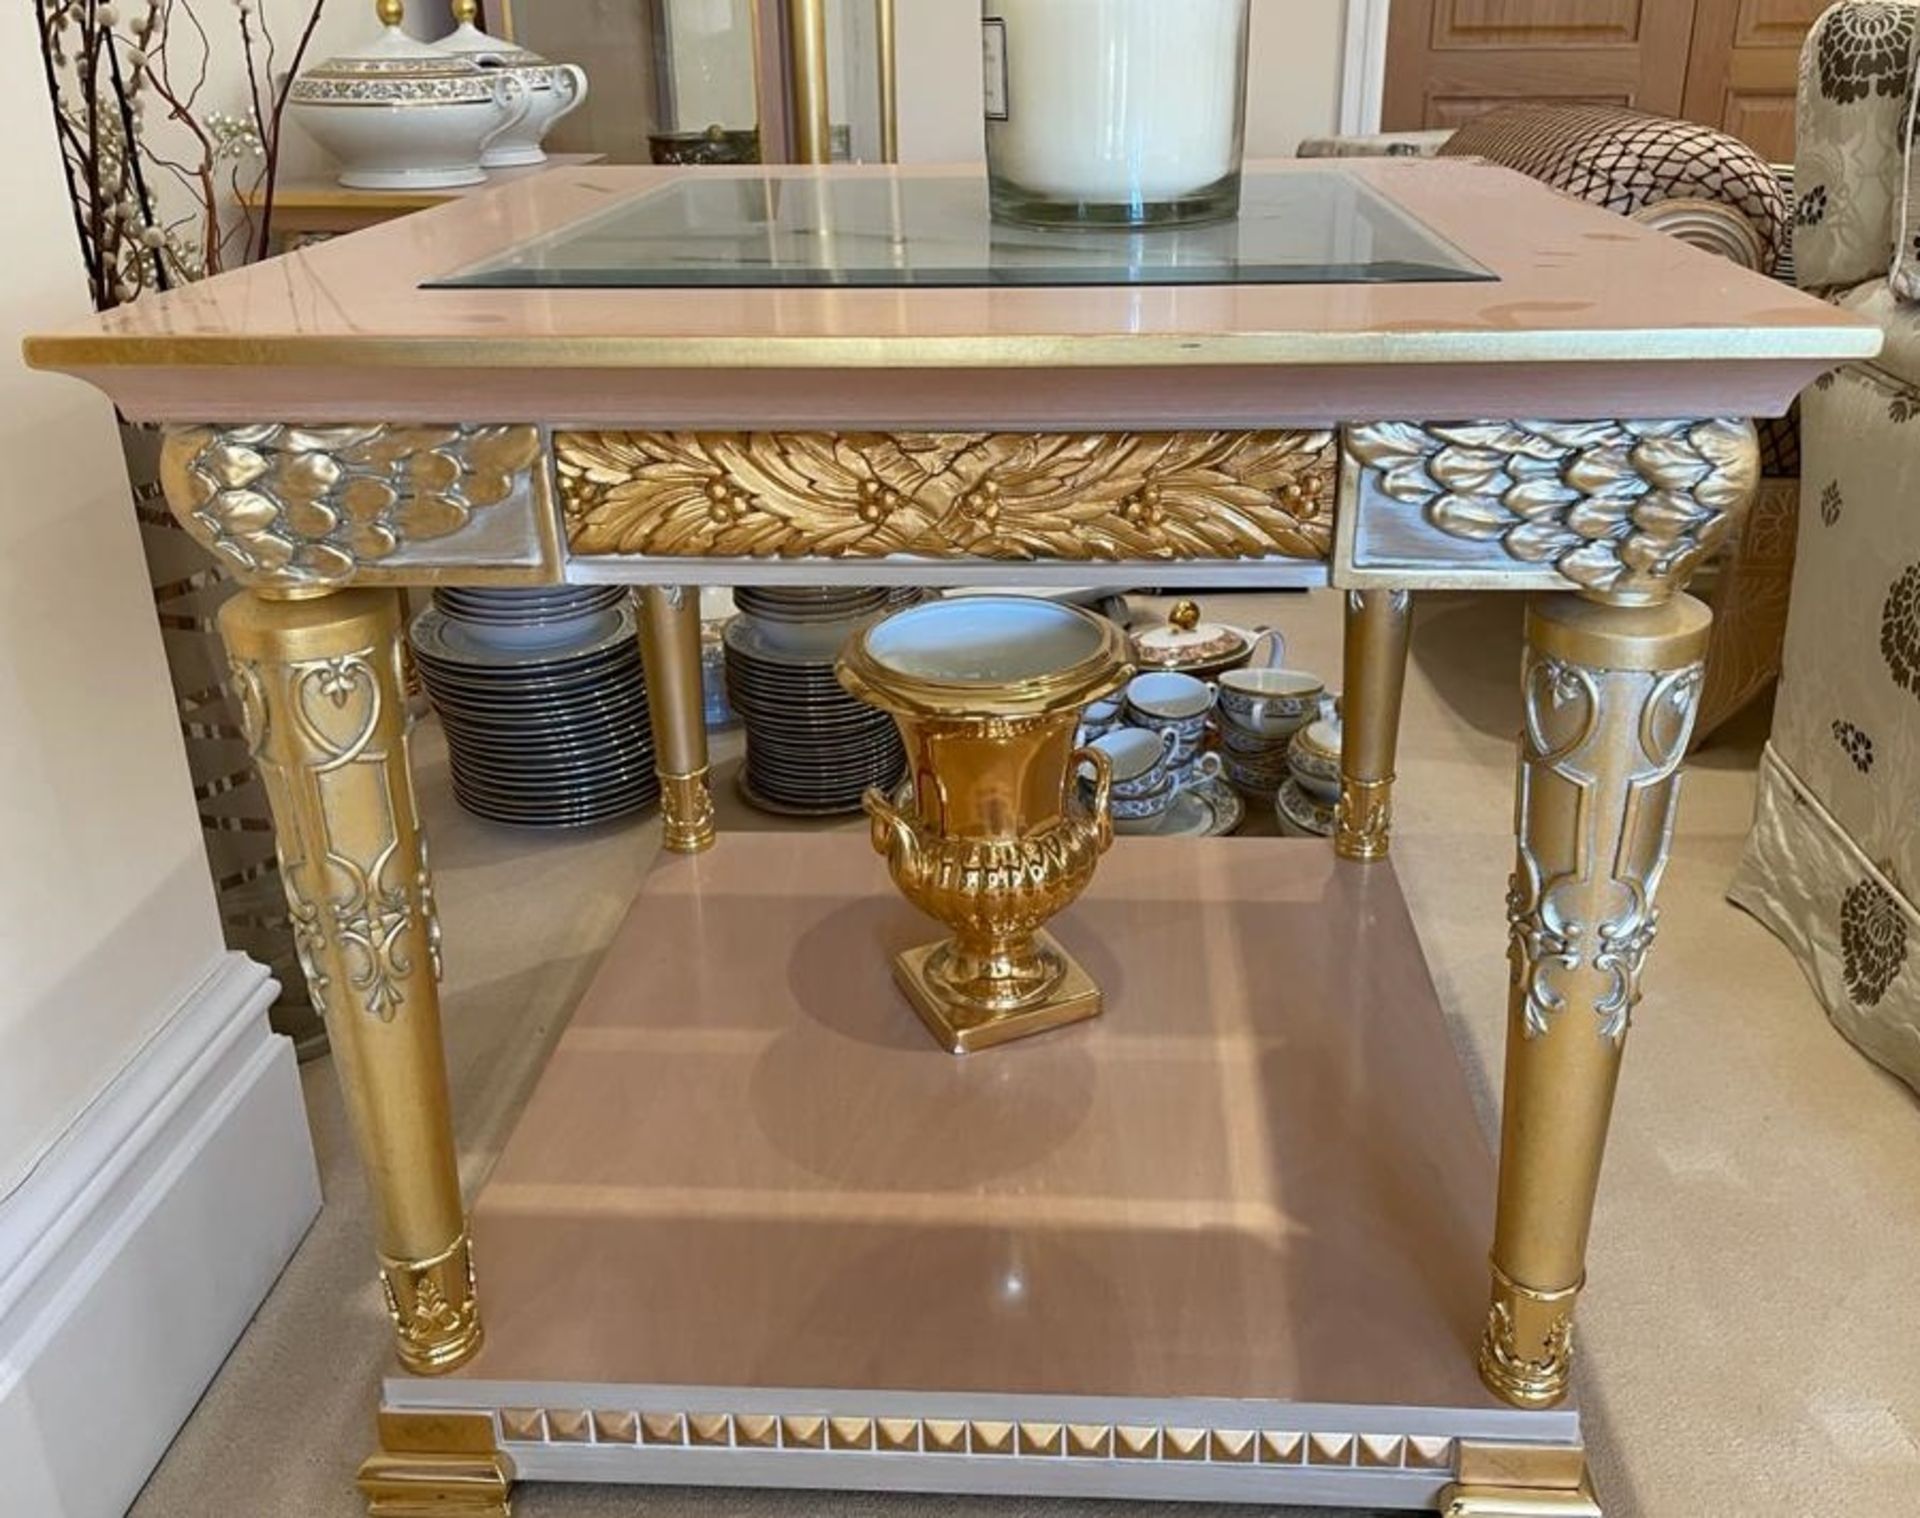 2 x Hand Carved Ornate Side Tables Complimented With Birchwood Veneer, Golden Pillar Legs, Carved - Image 11 of 13